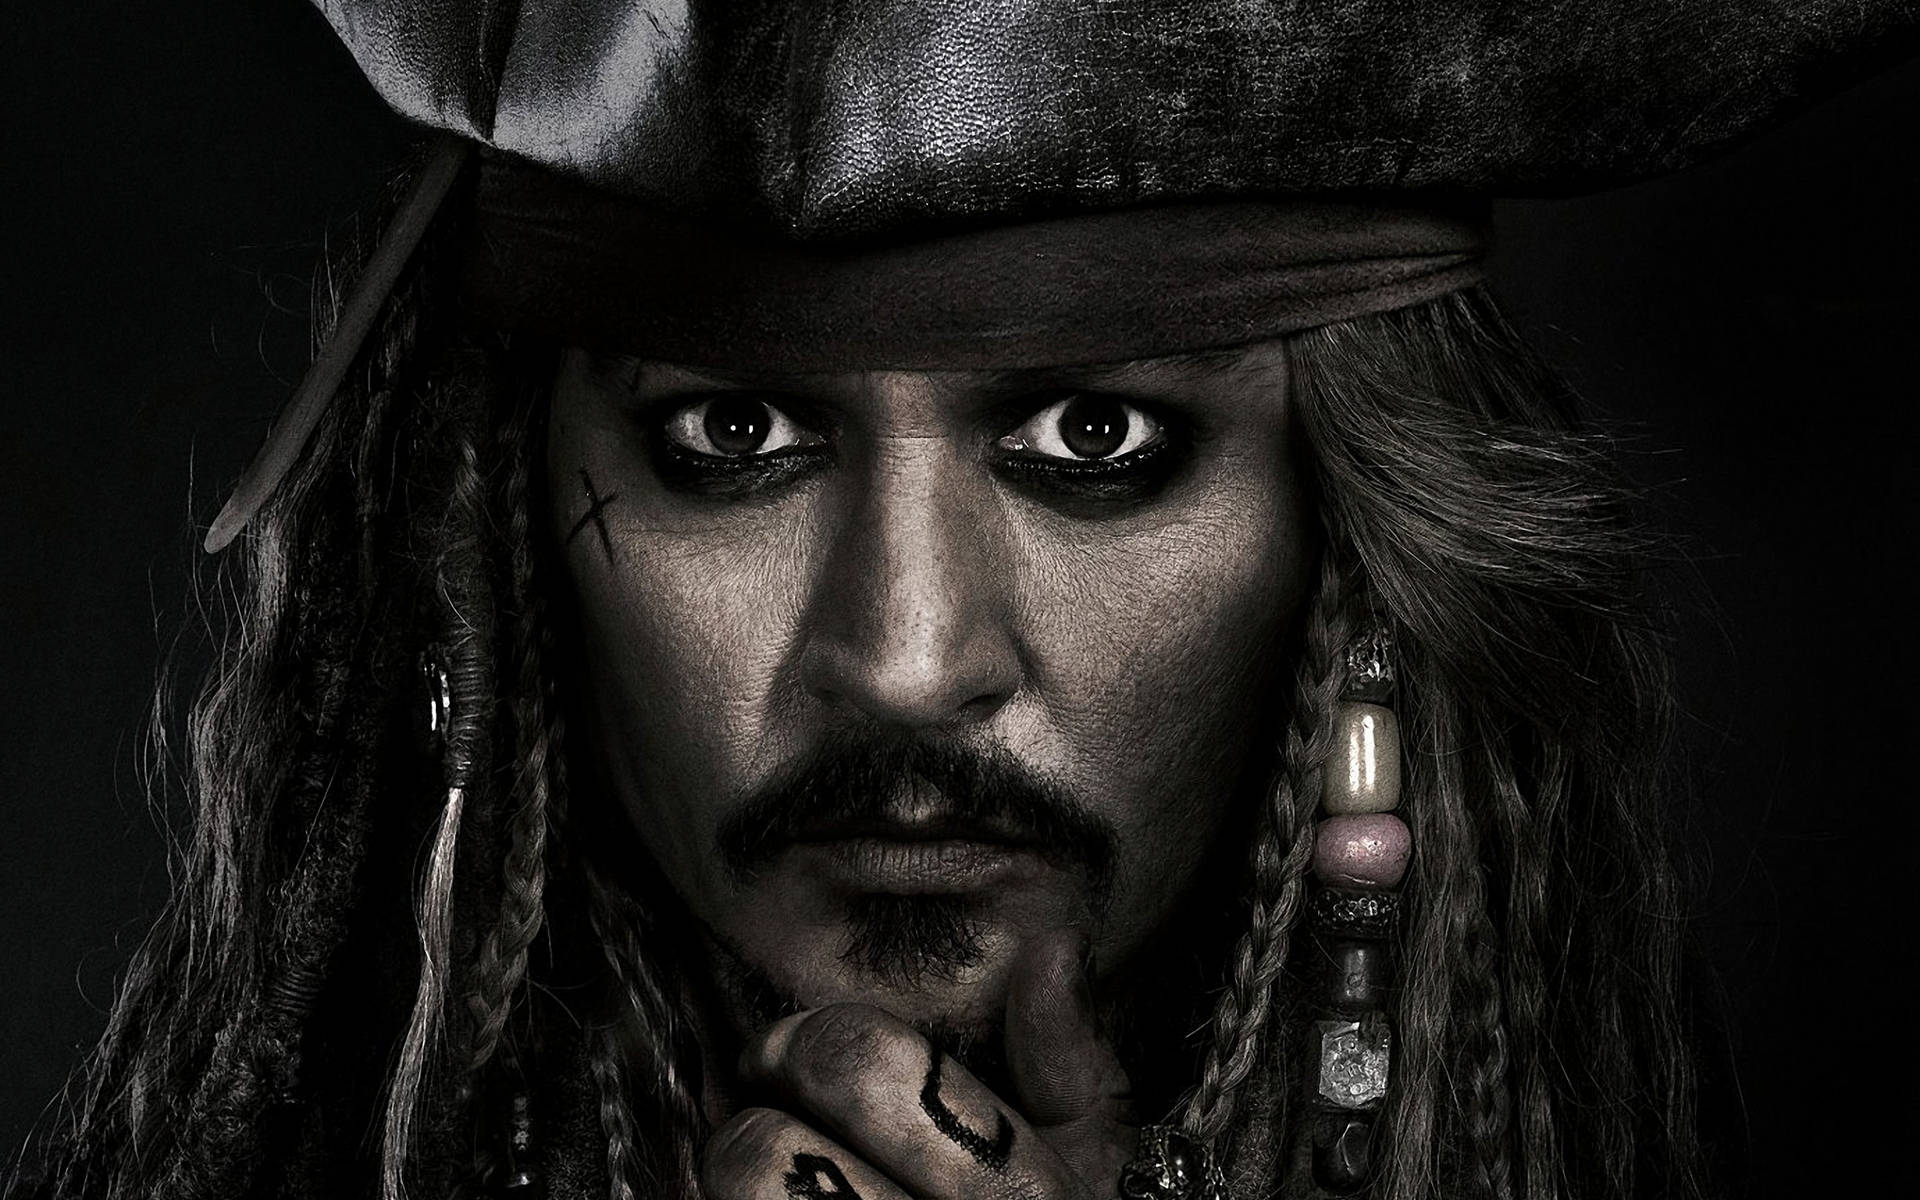 The enigmatic Captain Jack Sparrow in Monochrome Wallpaper